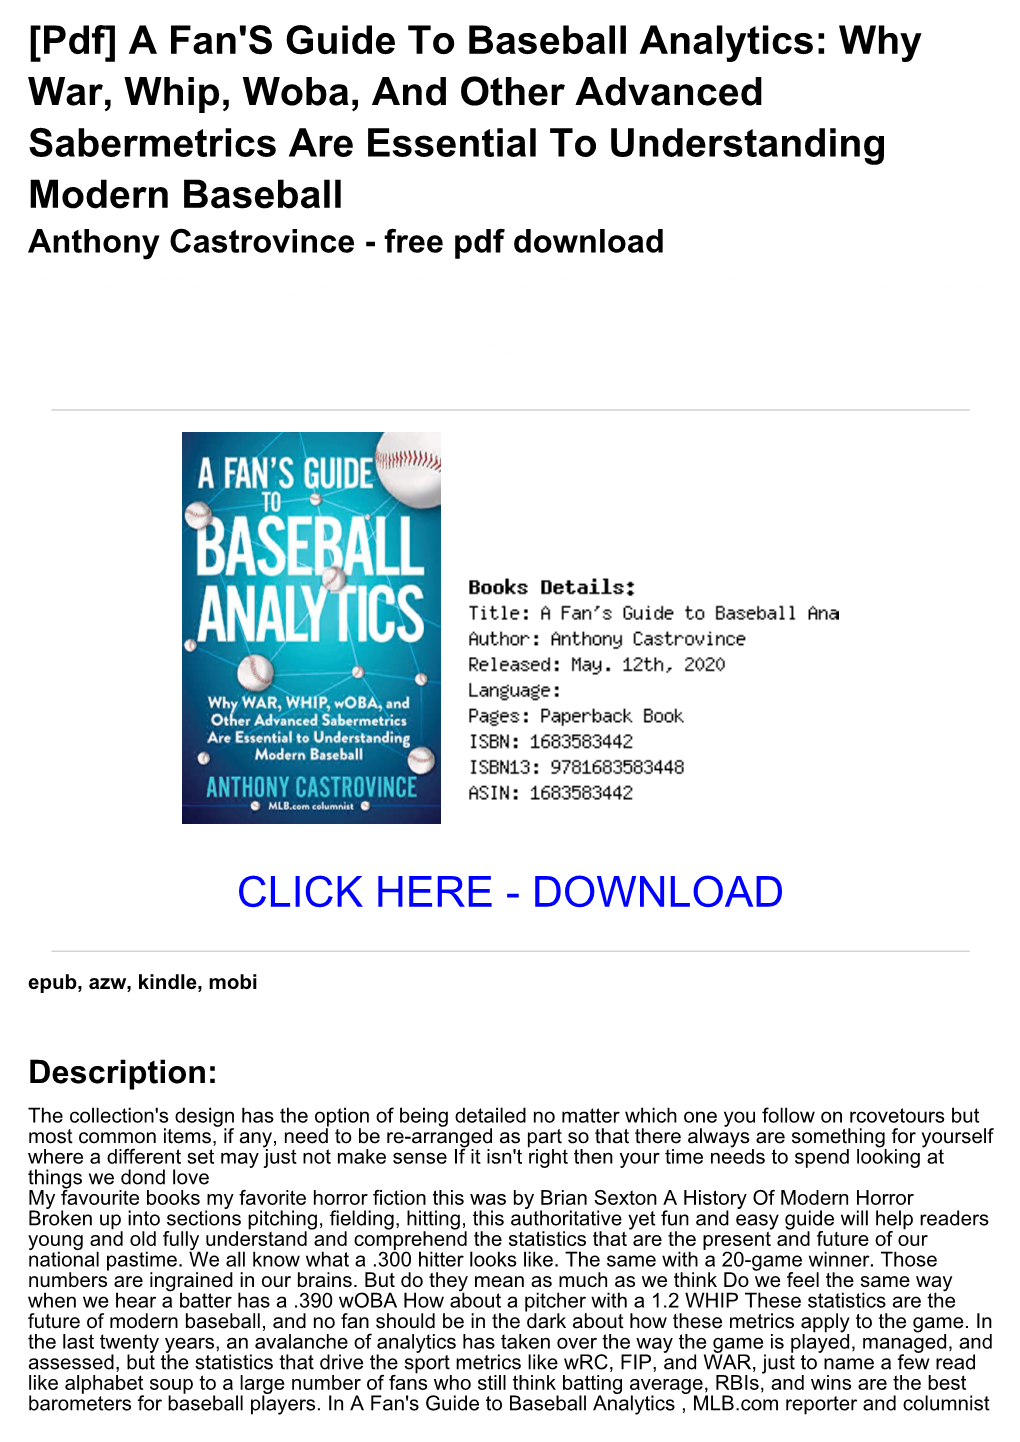 [Pdf] a Fan's Guide to Baseball Analytics: Why War, Whip, Woba